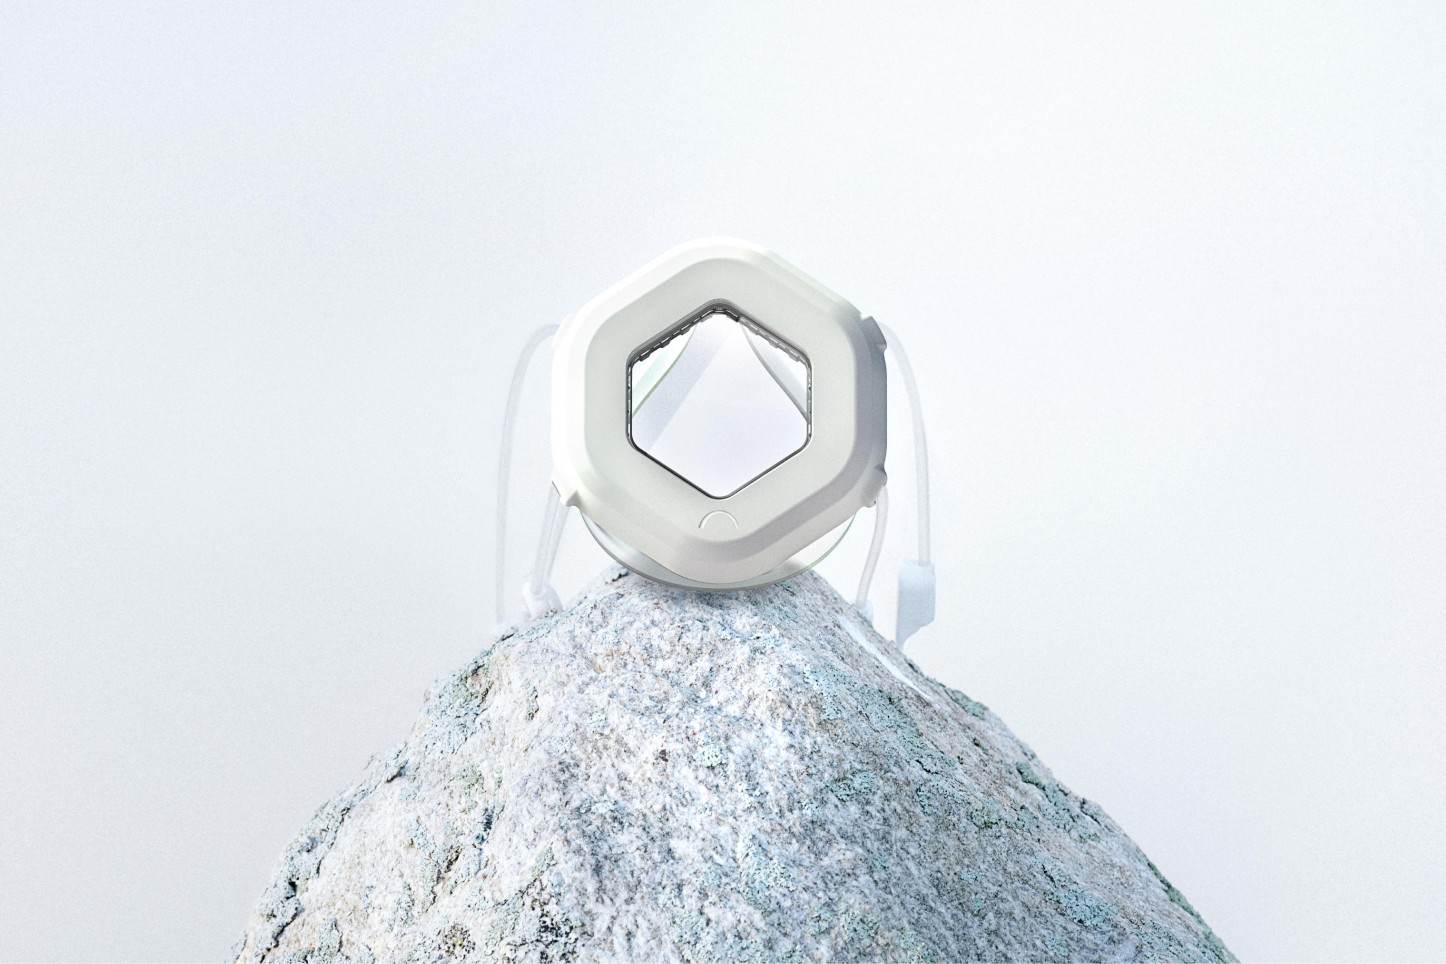 canopy mask sitting on a rock with white background